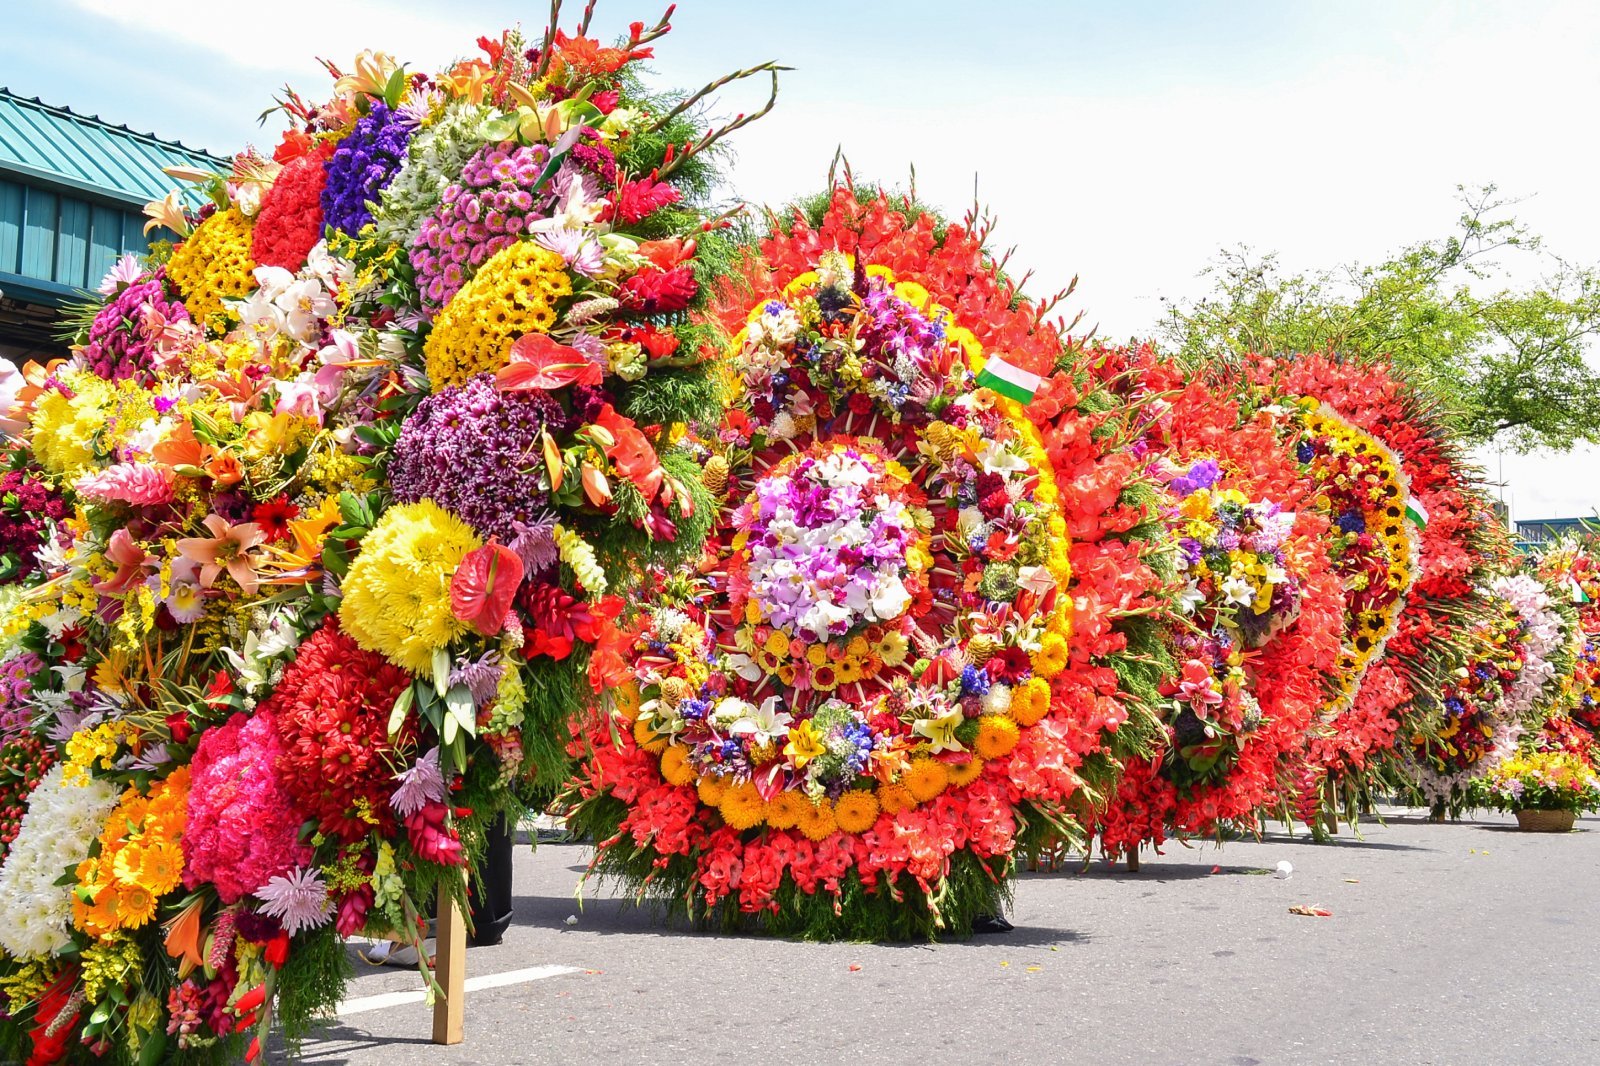 <p class="wp-caption-text">Image Credit: Shutterstock / oscar garces</p>  <p><span>Medellín’s Festival of Flowers is a week-long August celebration featuring parades, live music, and the unique “silleteros” who carry flower arrangements on their backs, showcasing the region’s floral diversity.</span></p> <p><b>Insider’s Tip: </b><span>Attend the Desfile de Silleteros, the festival’s highlight, early to secure a good viewing spot.</span></p> <p><b>When to Travel: </b><span>Early August</span></p> <p><b>How to Get There: </b><span>Medellín is accessible by air, with the festival events spread across the city, easily reachable by metro or taxi.</span></p>